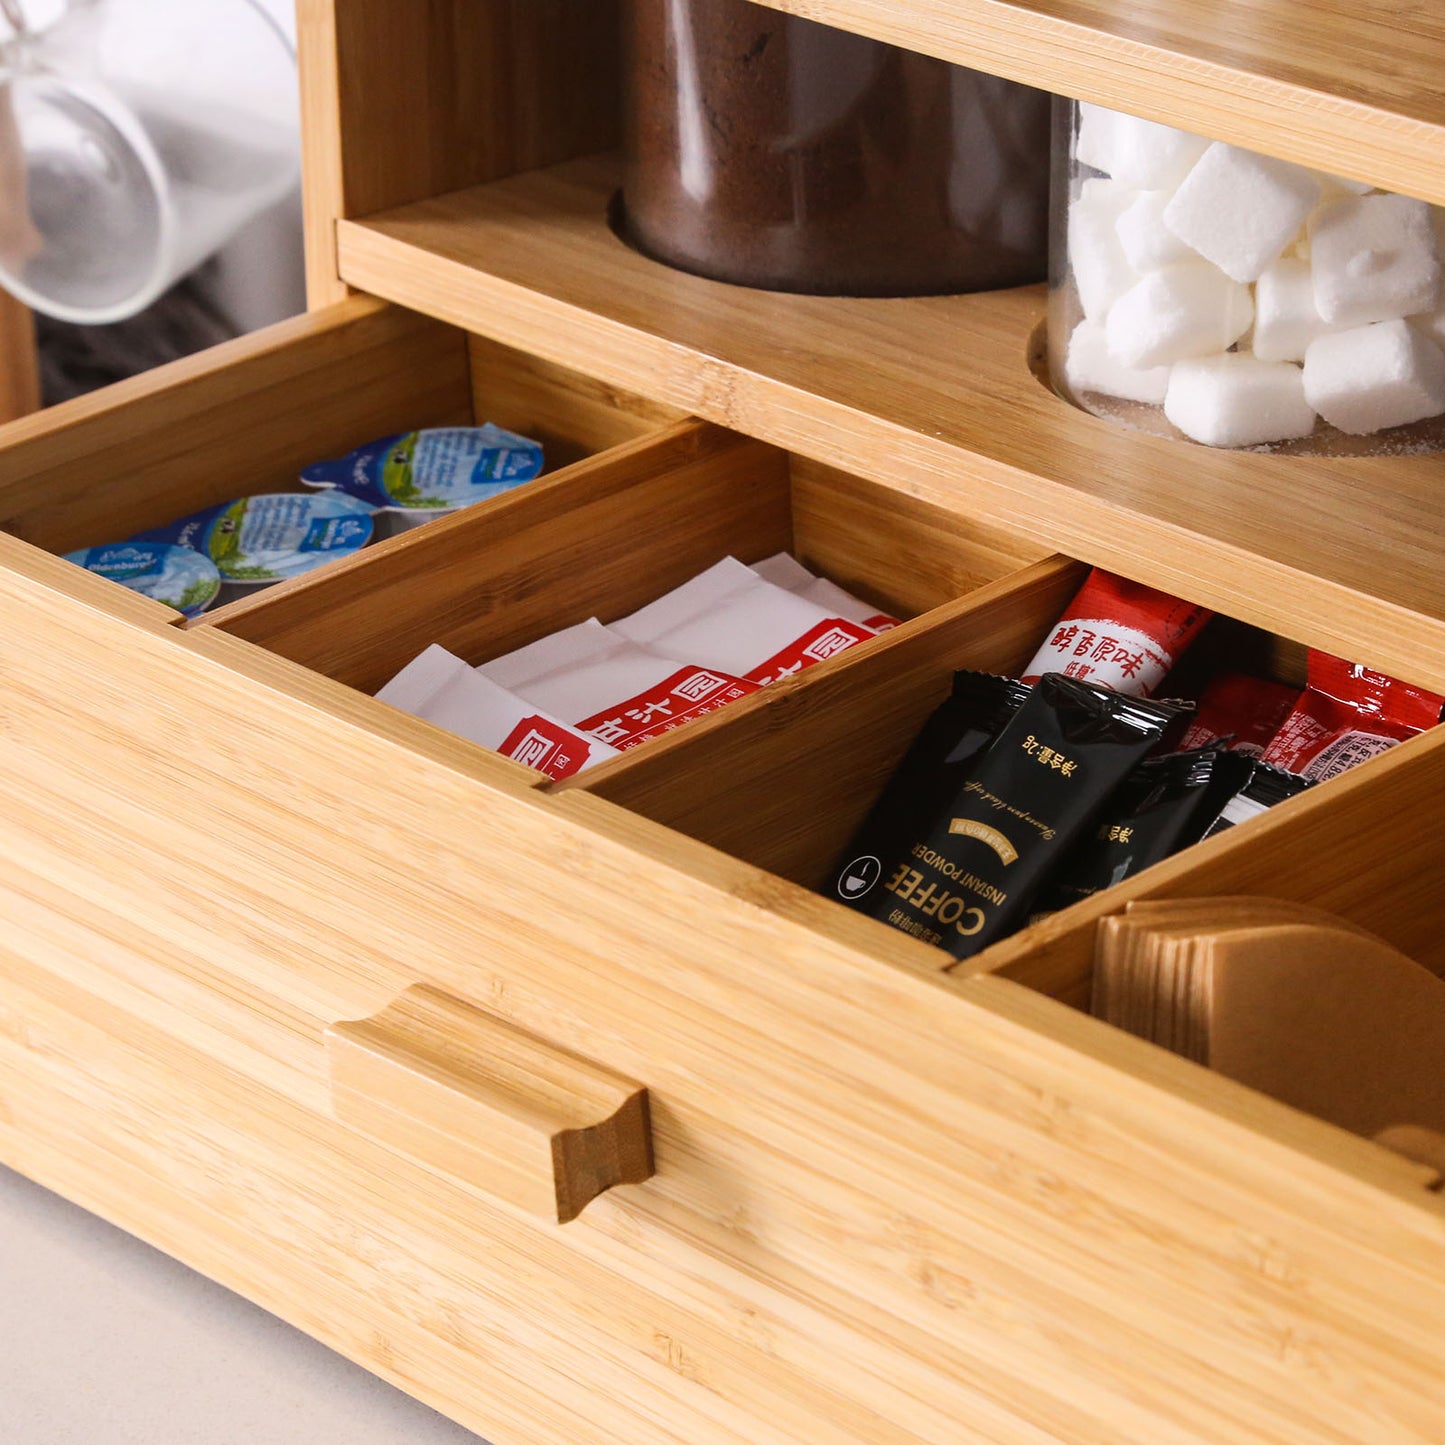 KKC Coffee Station Organizer, K Cup Coffee Pods Holder with Drawer, Countertop Coffee Bar Accessories Organizer, Coffee Pod Holder Storage Basket, for Coffee Capsule Pod, Sugar, Straw.